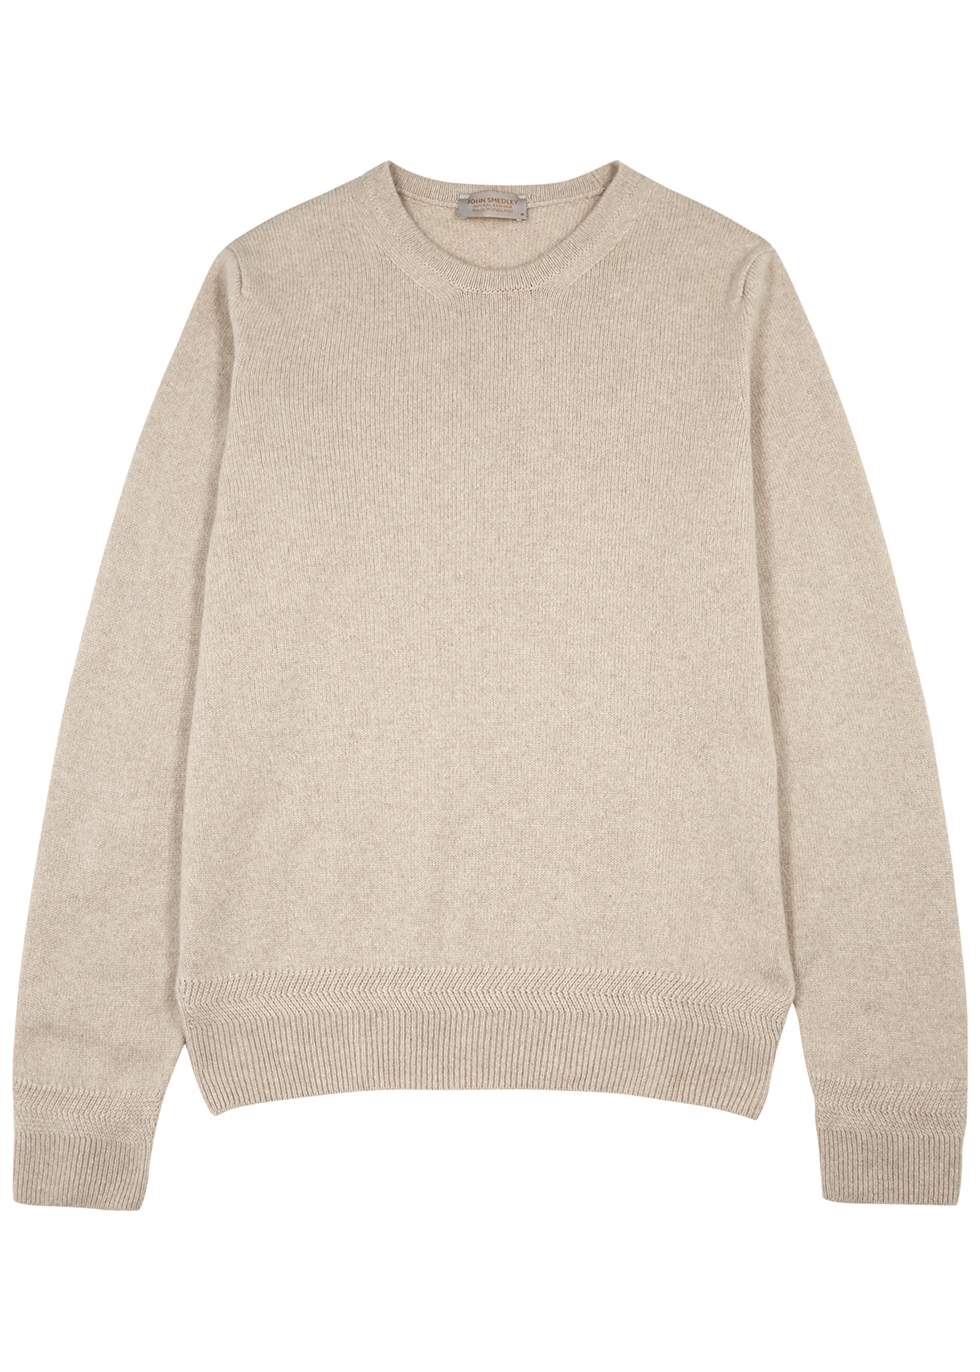 Niko stone cashmere and wool-blend jumper